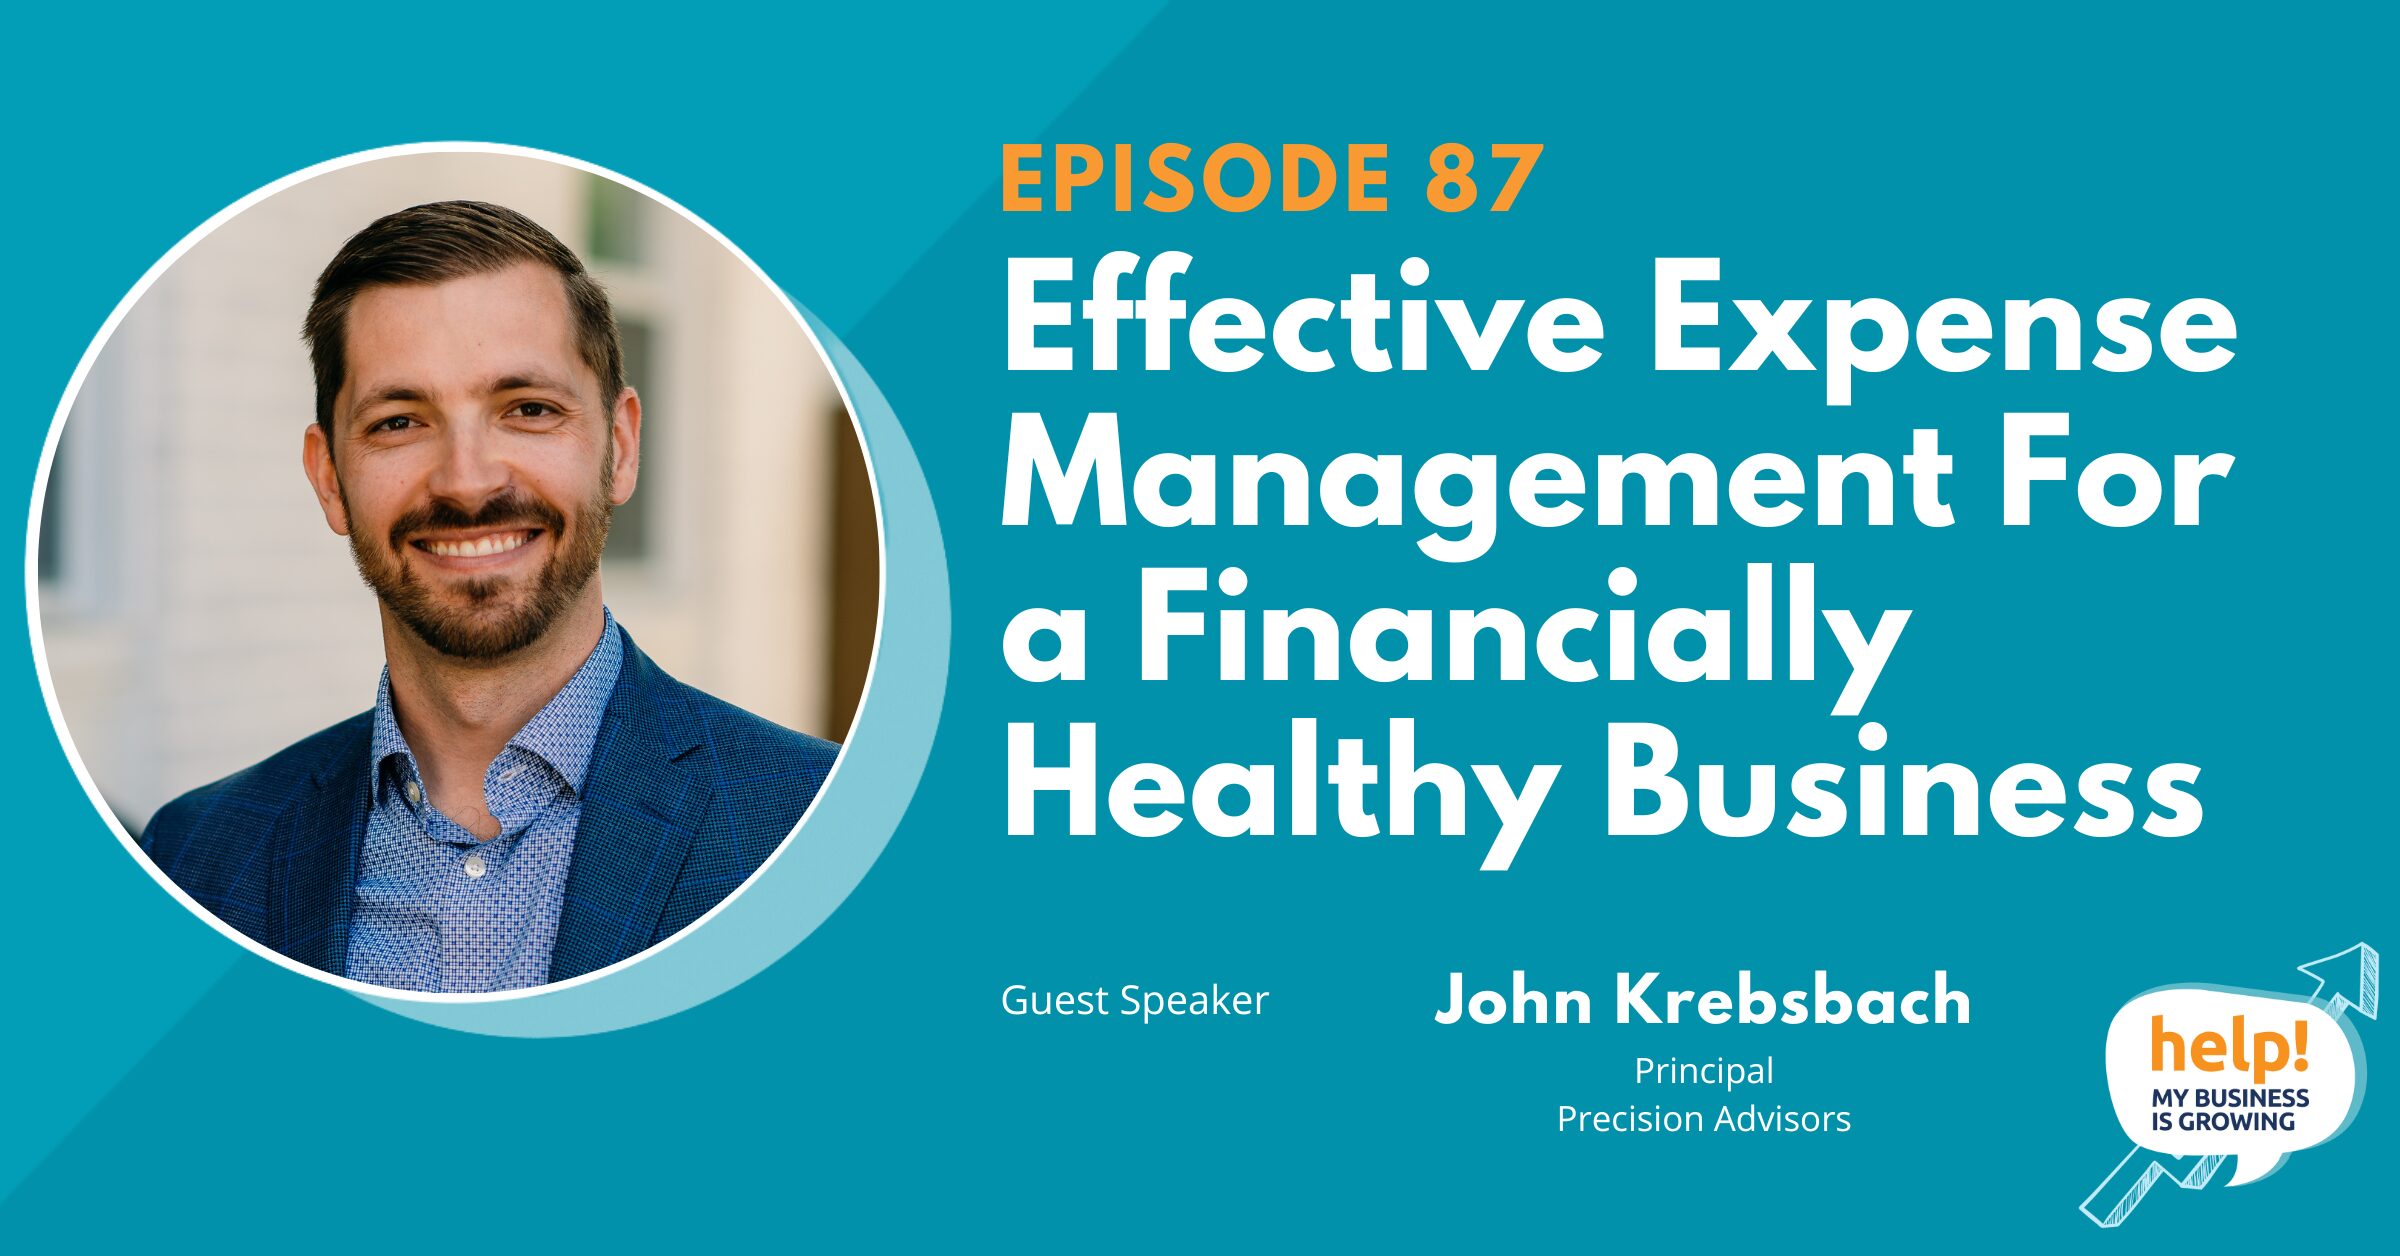 Effective Expense Management For a Financially Healthy Business